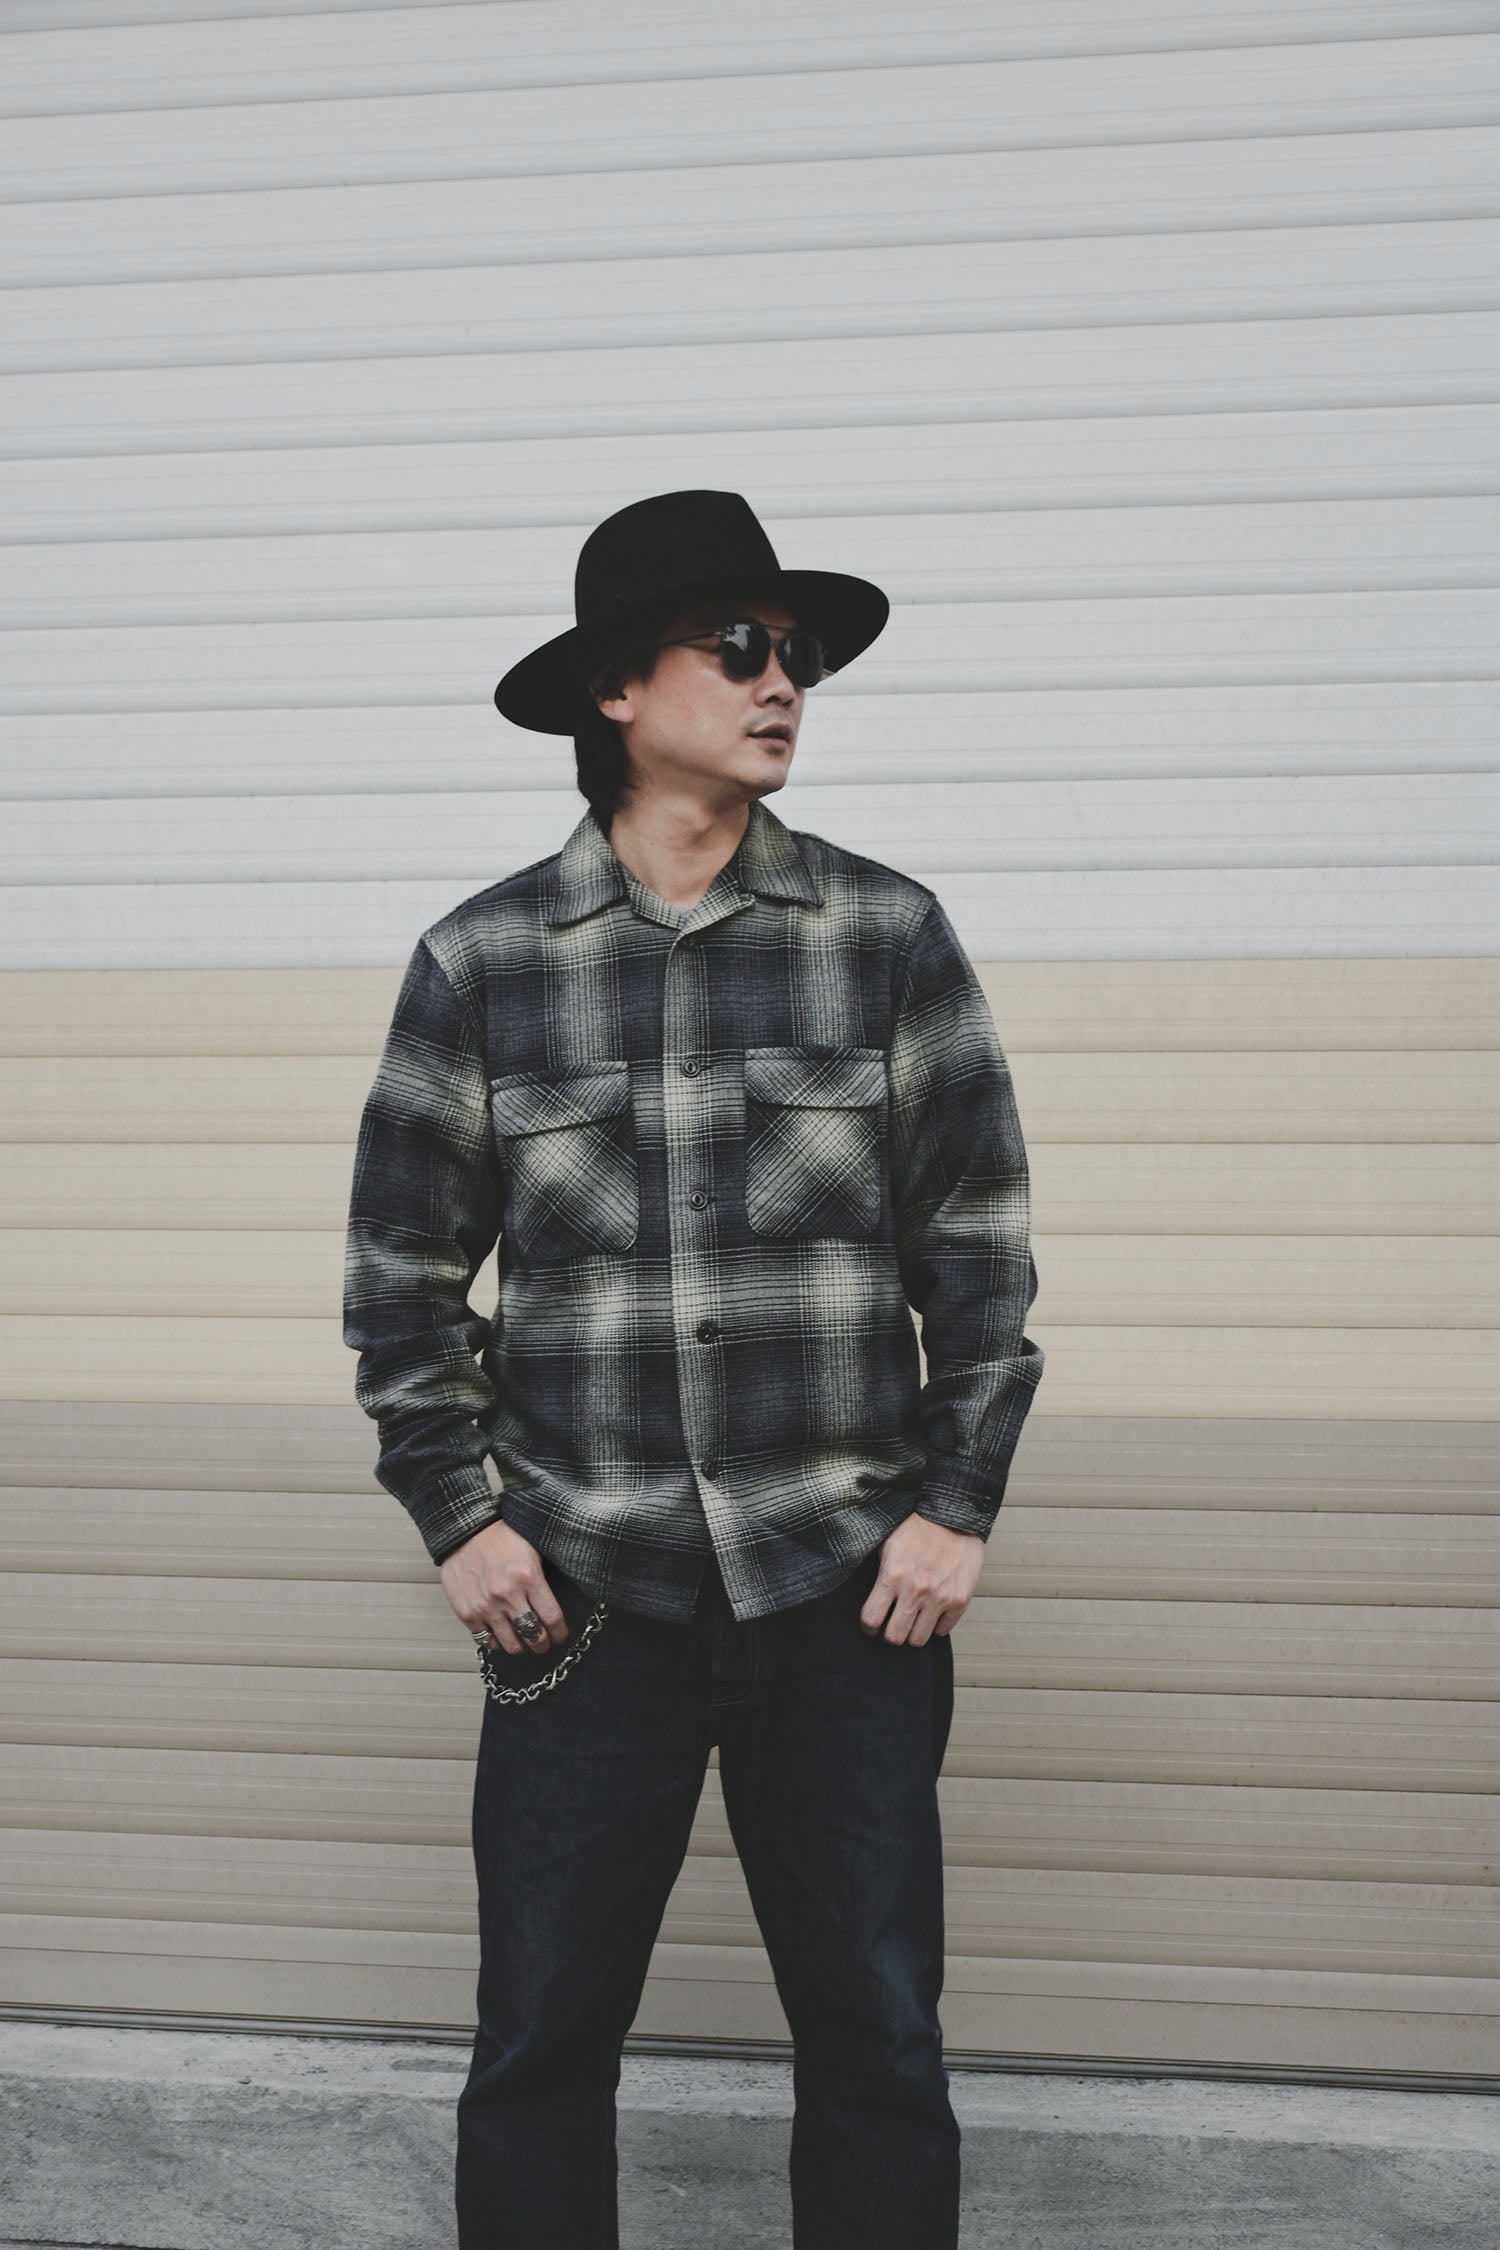 OPEN WIND SHIRTS - GRY SHDW - May club